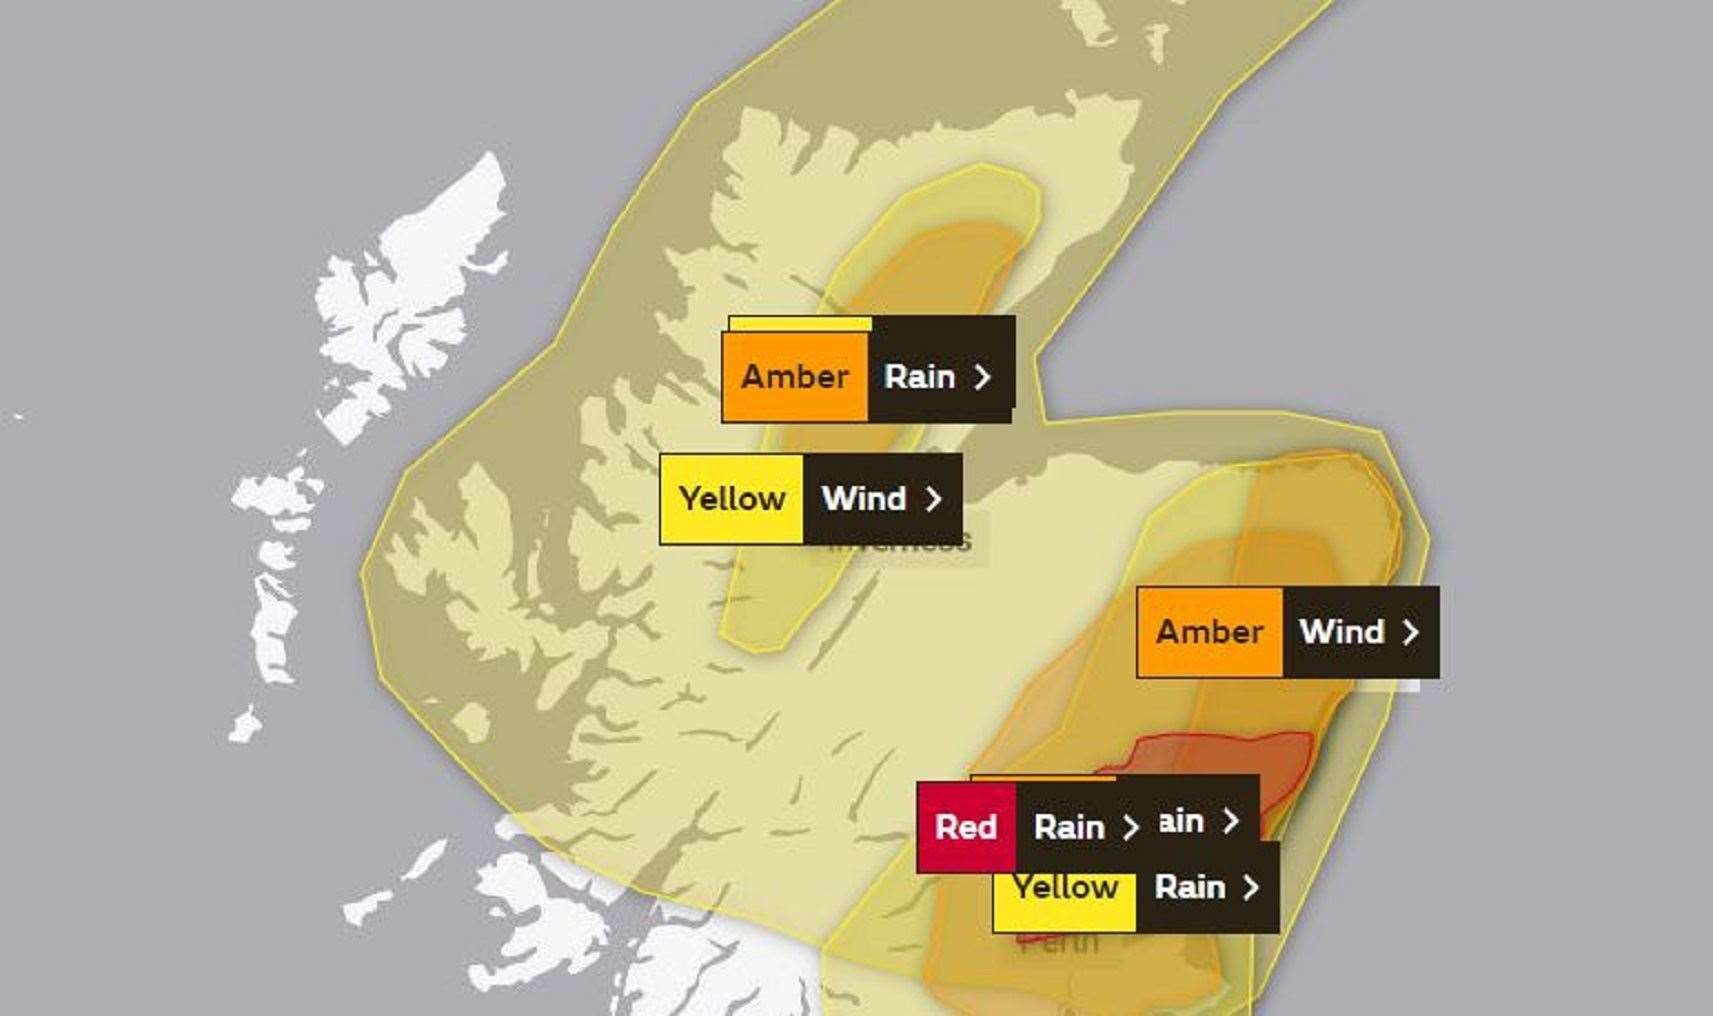 Met Office map showing warnings related to Storm Babet for Friday and Saturday.